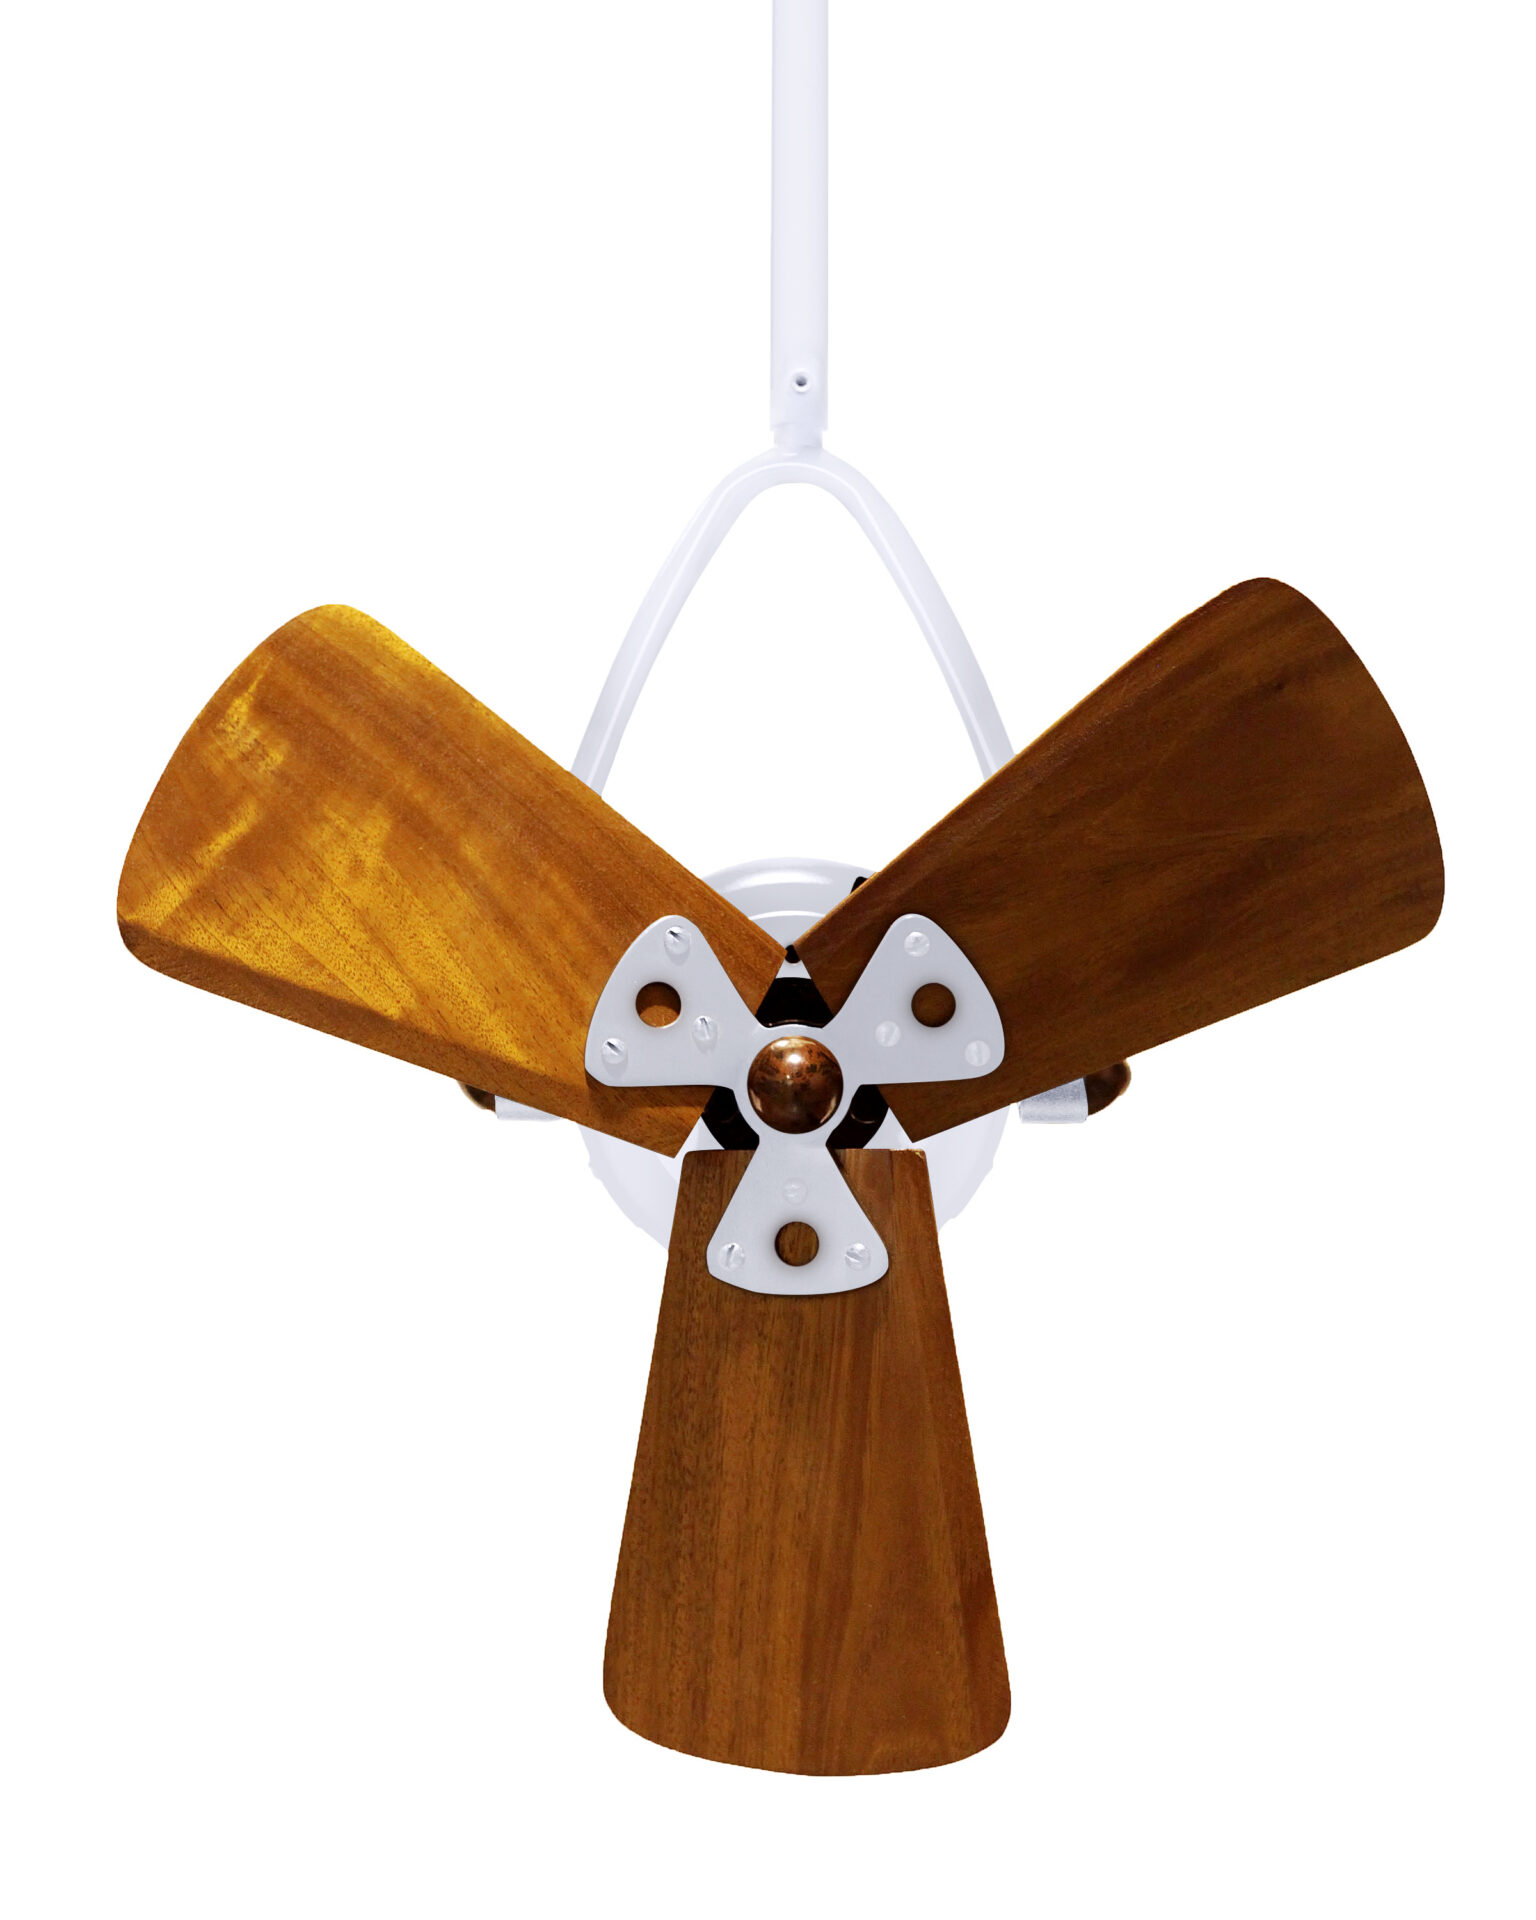 Jarold Direcional ceiling fan in gloss white finish with solid mahogany blades made by Matthews Fan Company.